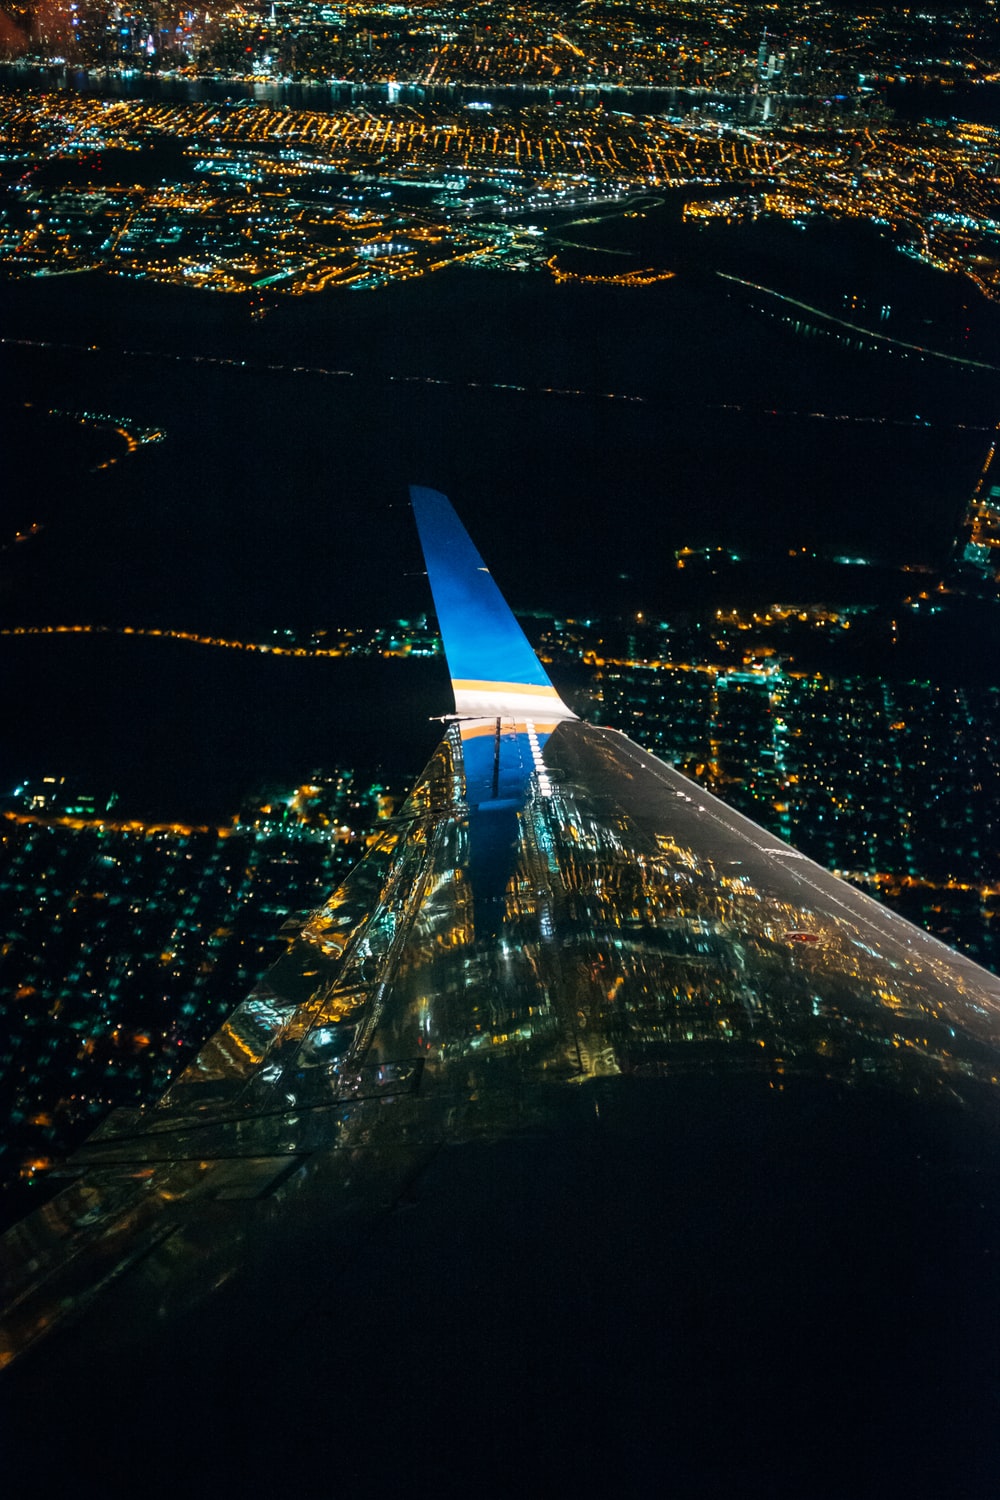 Airplane Night Picture. Download Free Image